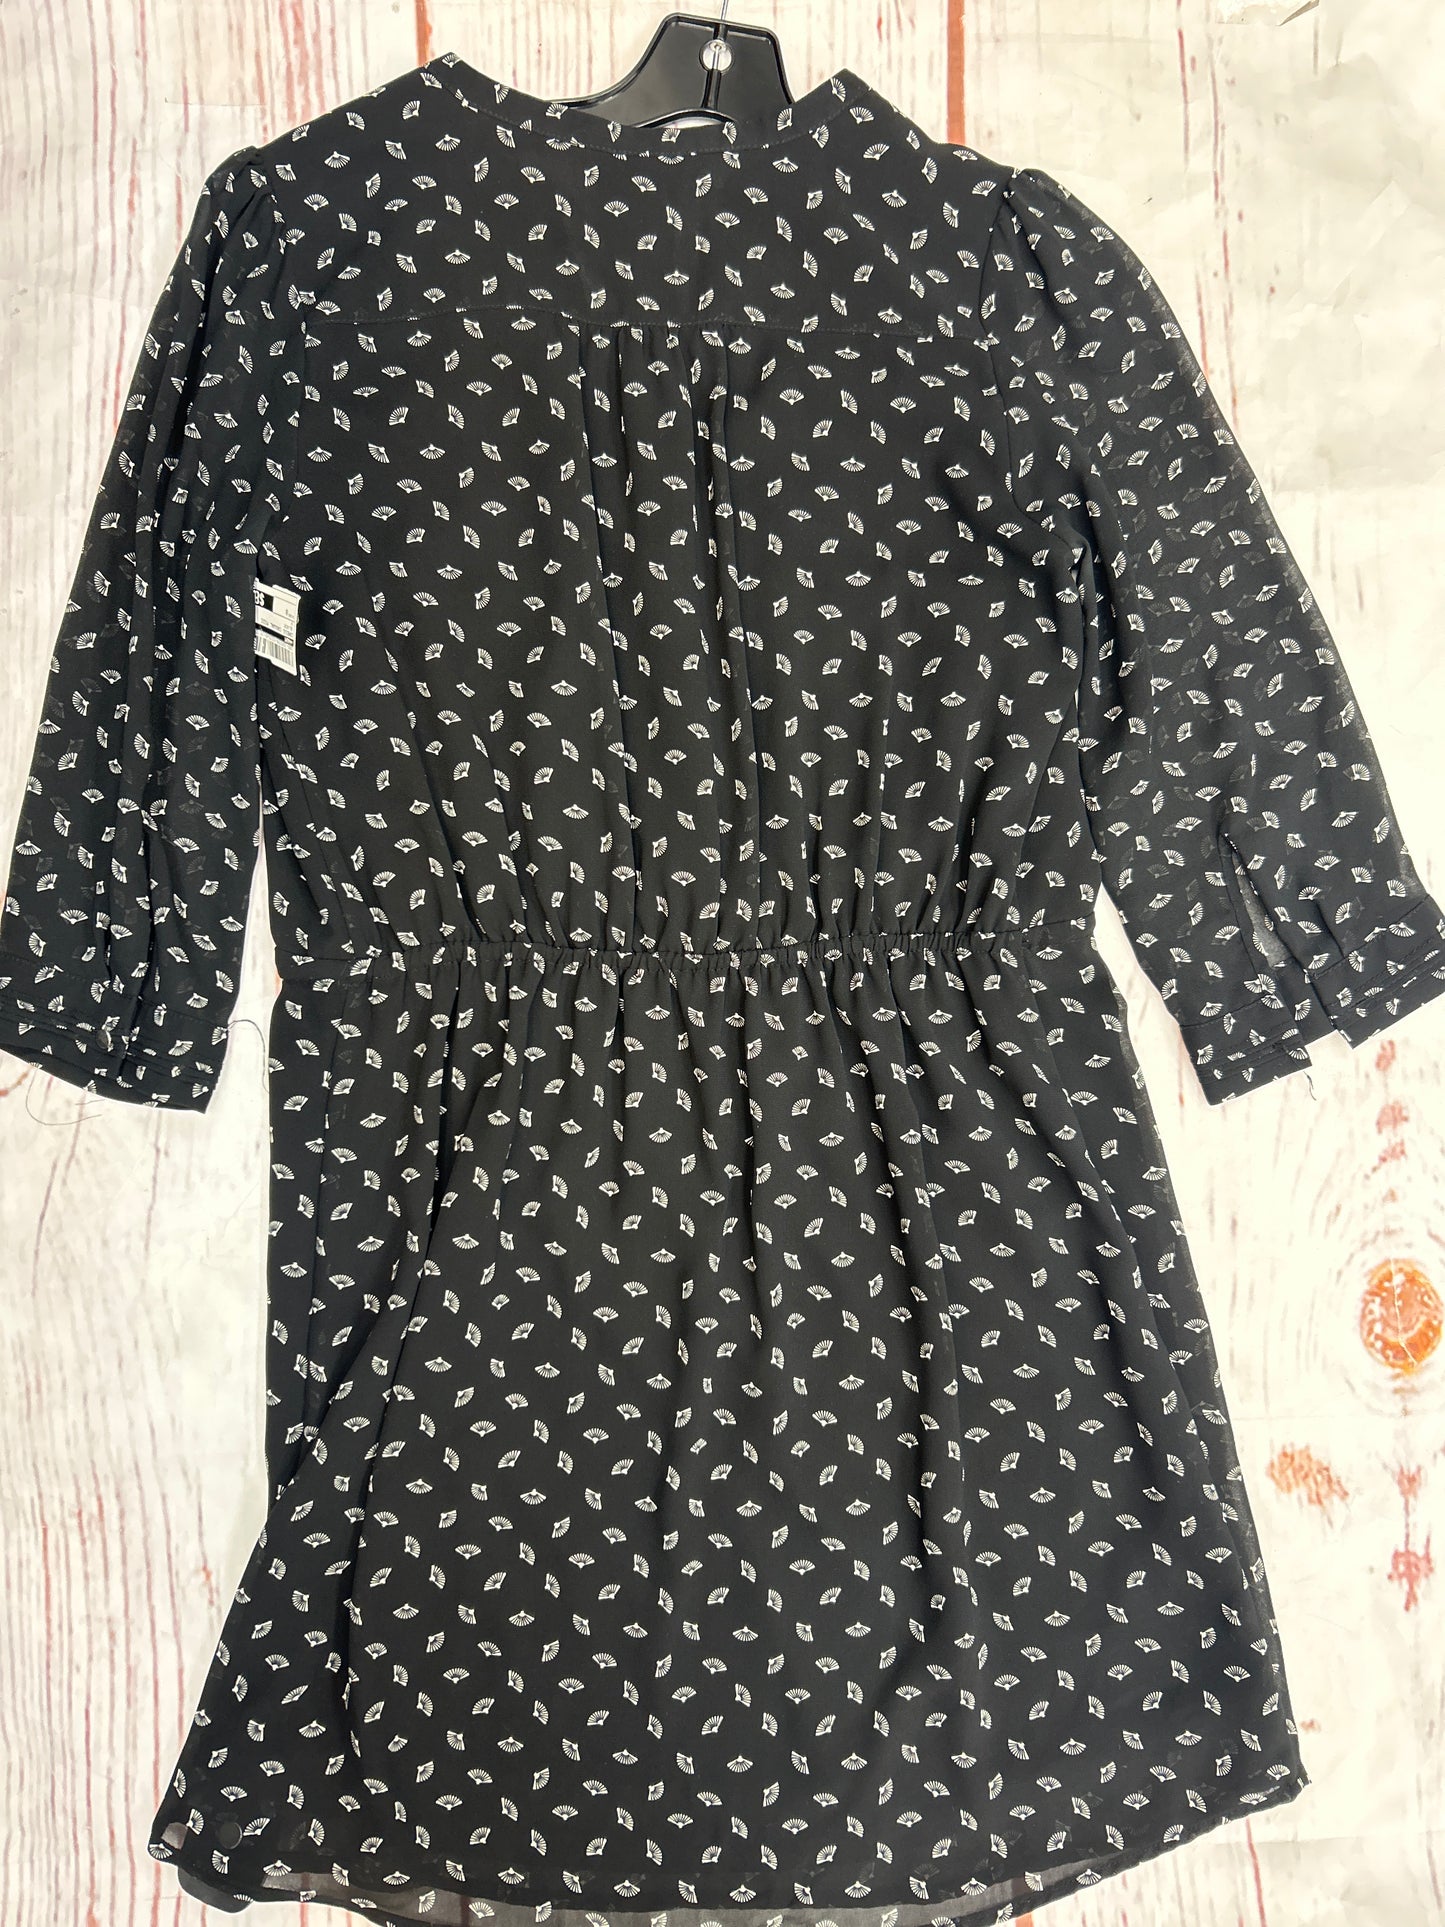 Dress Casual Midi By H&m  Size: 8